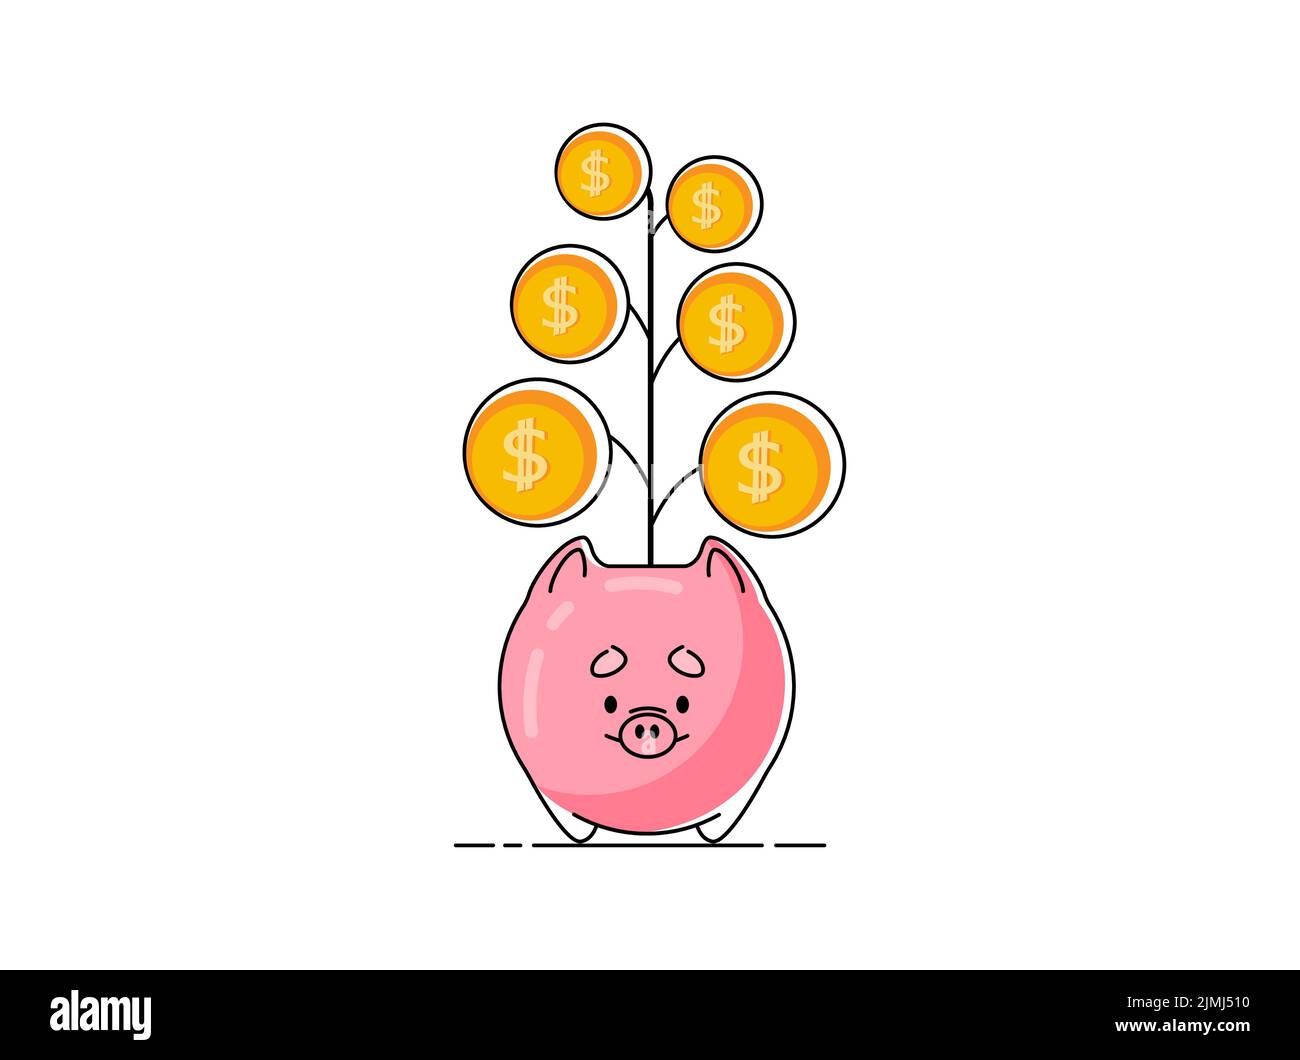 Money tree icon with dollars-coins growing out of a vase in the form of a piggy bank.Vector flat illustration isolated on a white background Stock Vector